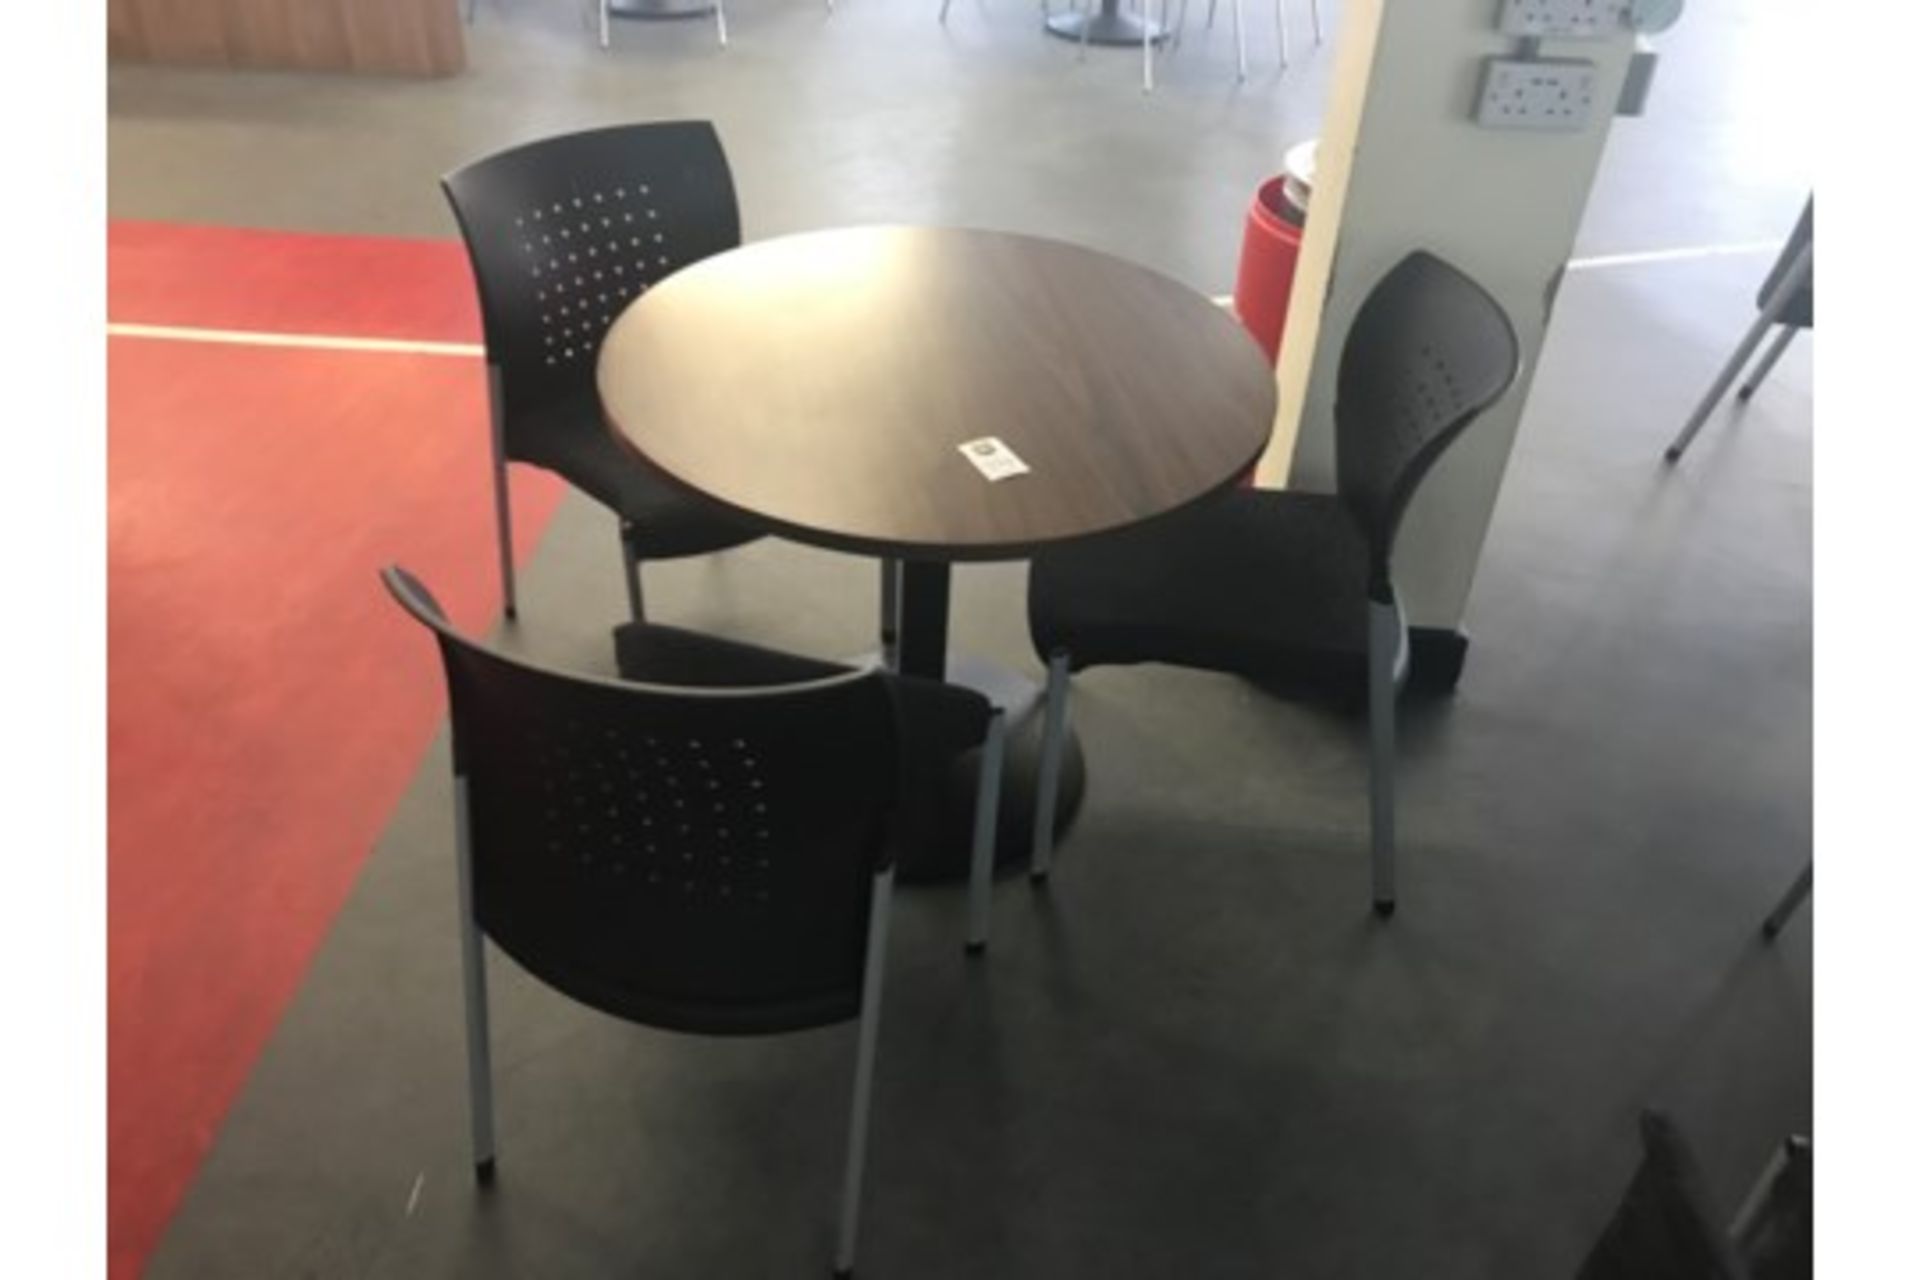 Cafe Table With 3 Padded Chairs